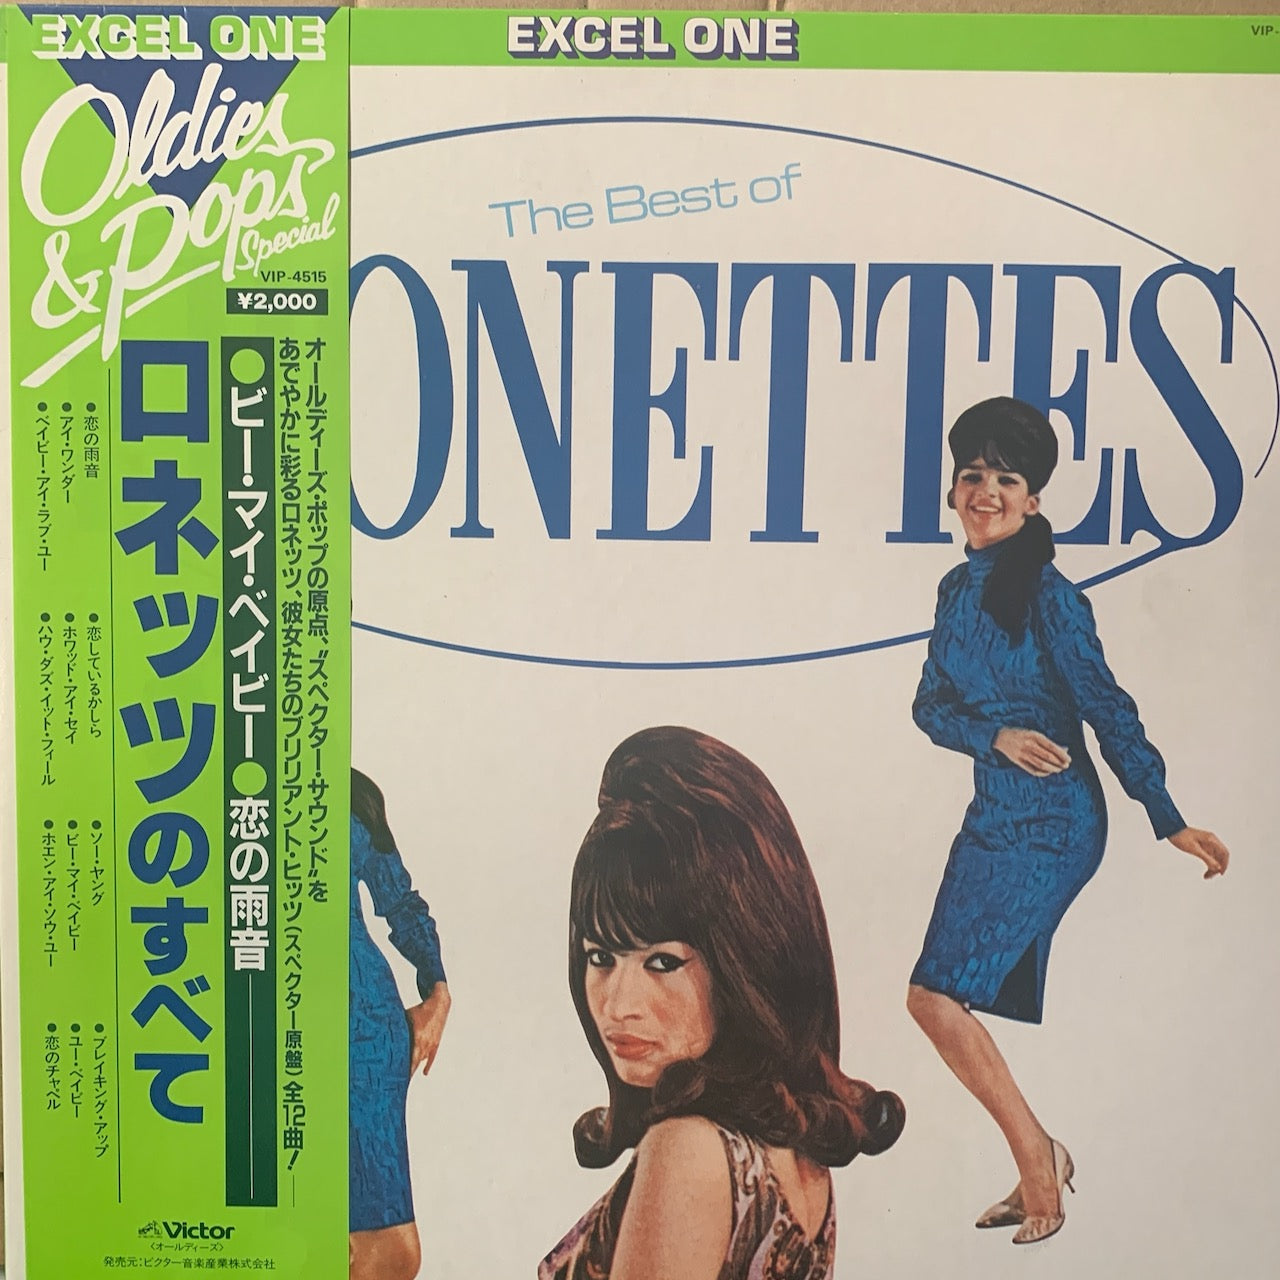 THE RONETTES - THE BEST OF THE RONETTES    NM /NM  1981